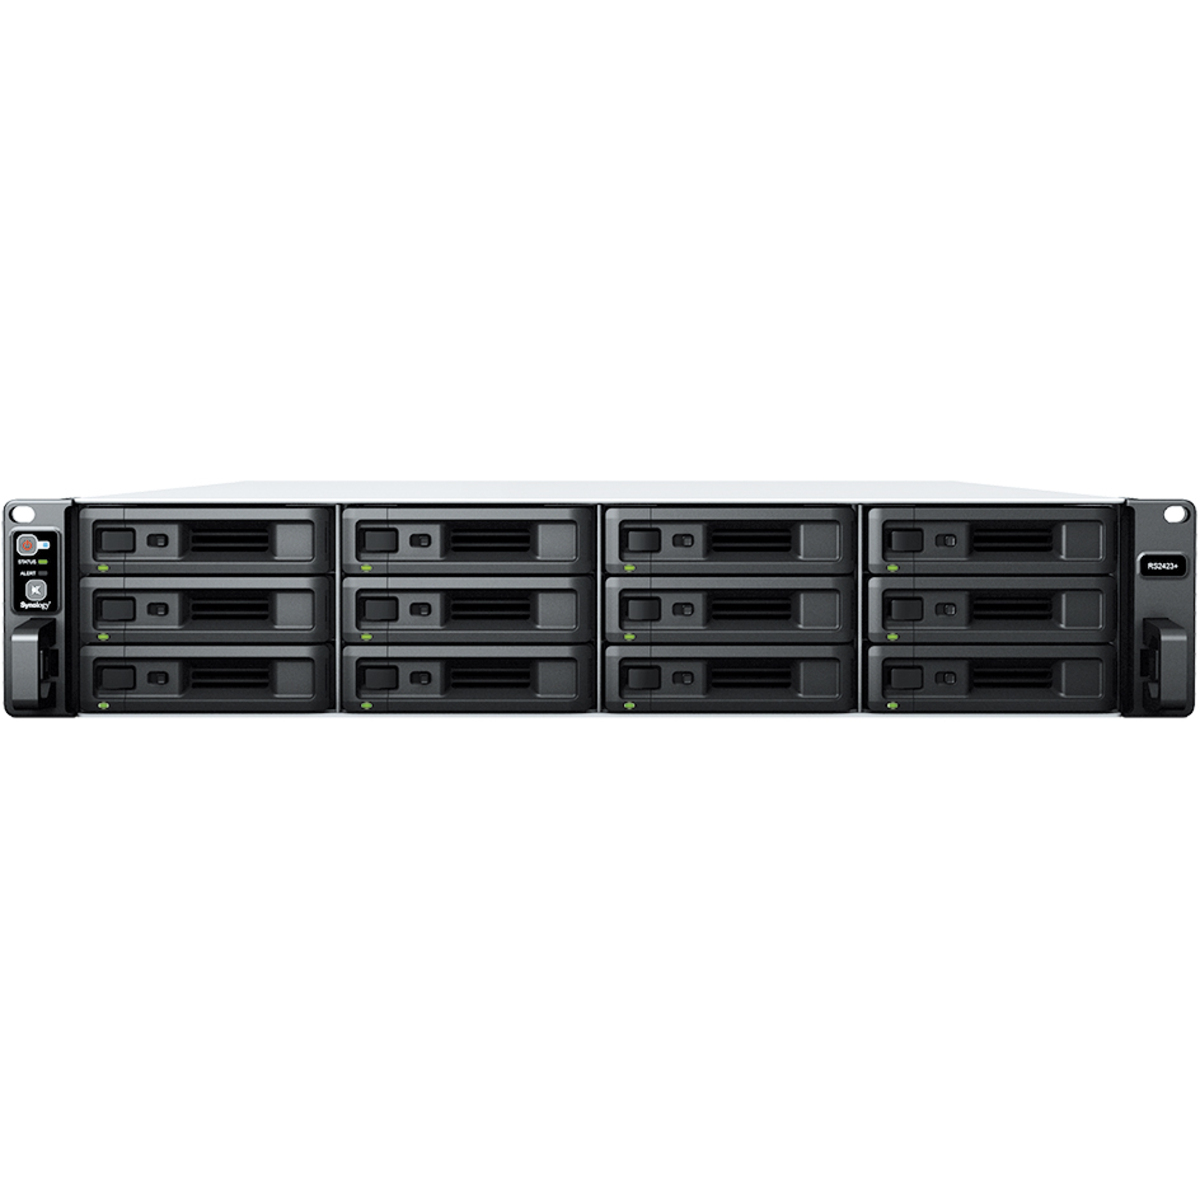 Synology RackStation RS2423+ 64tb 12-Bay RackMount Multimedia / Power User / Business NAS - Network Attached Storage Device 8x8tb Western Digital Red Pro WD8003FFBX 3.5 7200rpm SATA 6Gb/s HDD NAS Class Drives Installed - Burn-In Tested RackStation RS2423+